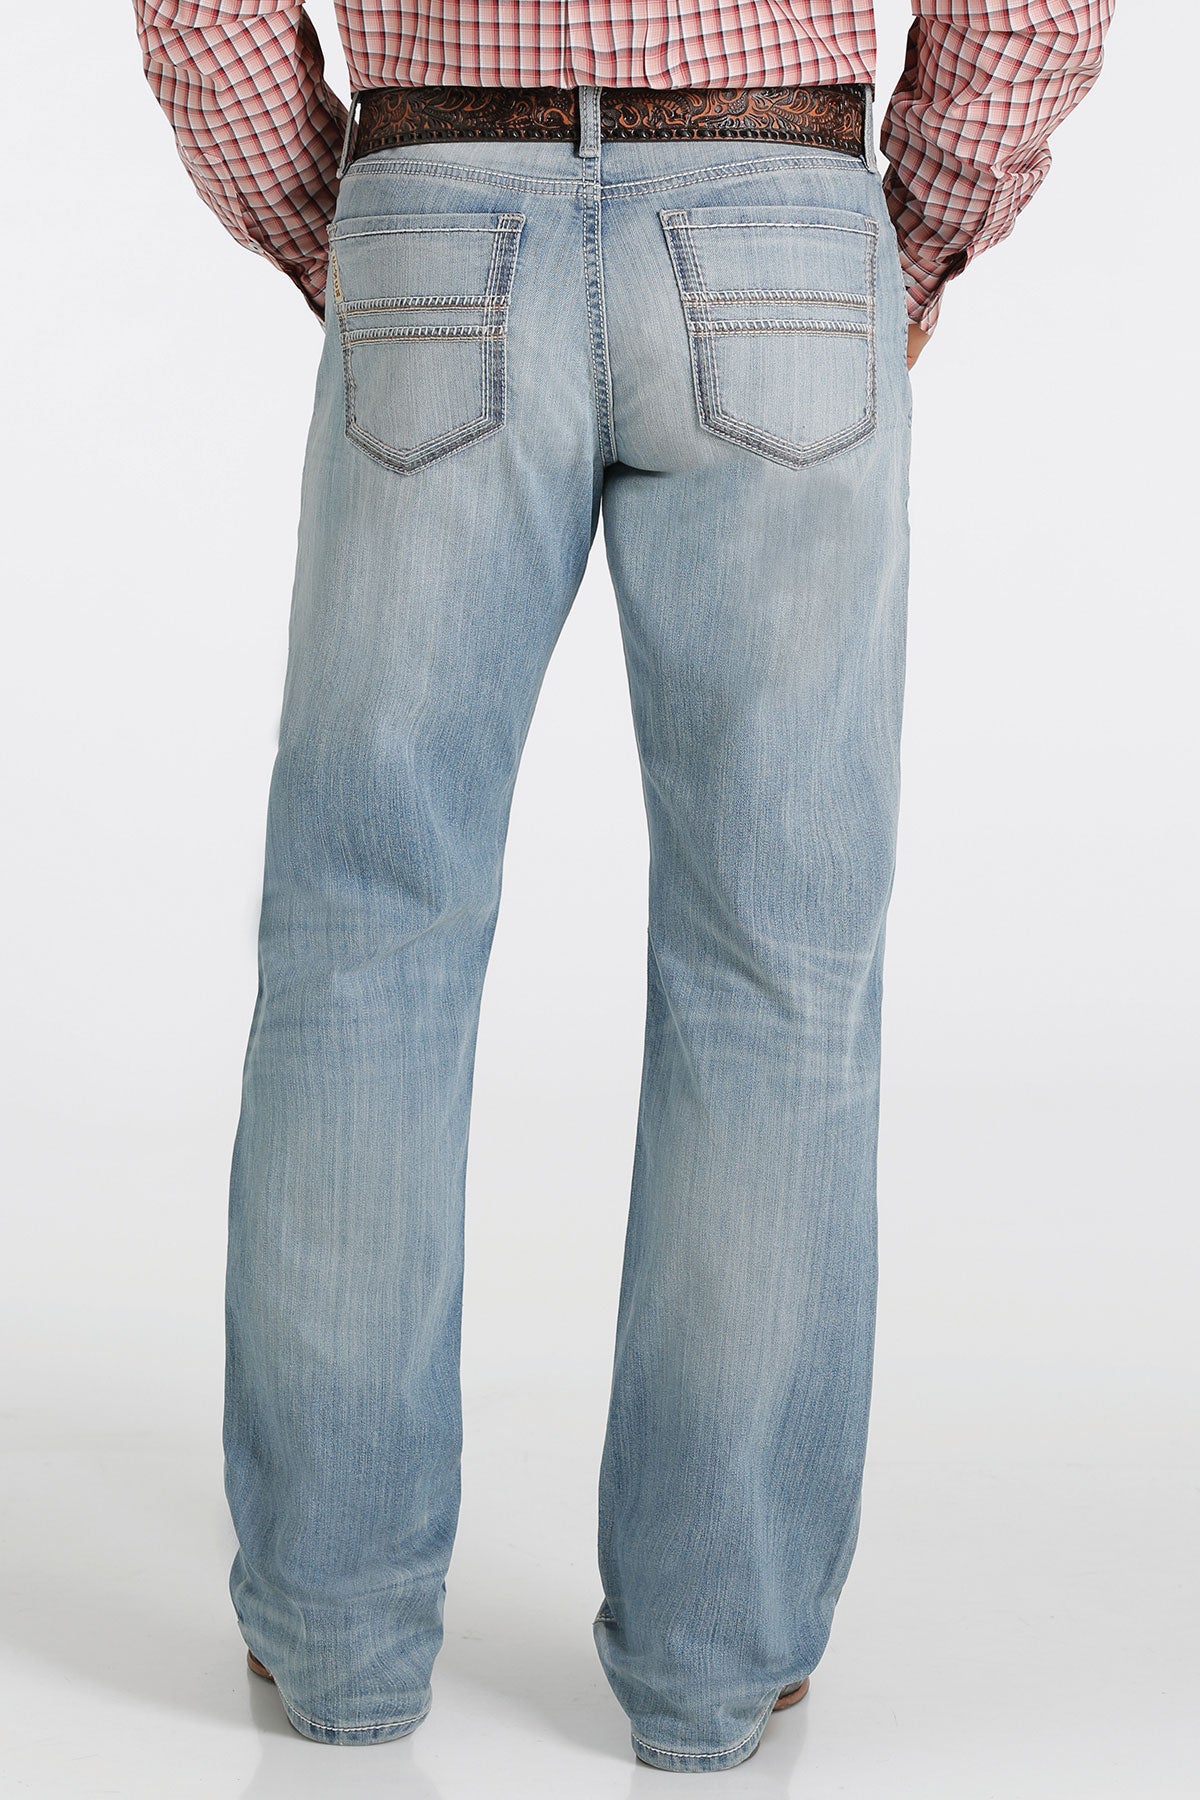 CINCH MEN'S RELAXED FIT GRANT - LIGHT STONEWASH